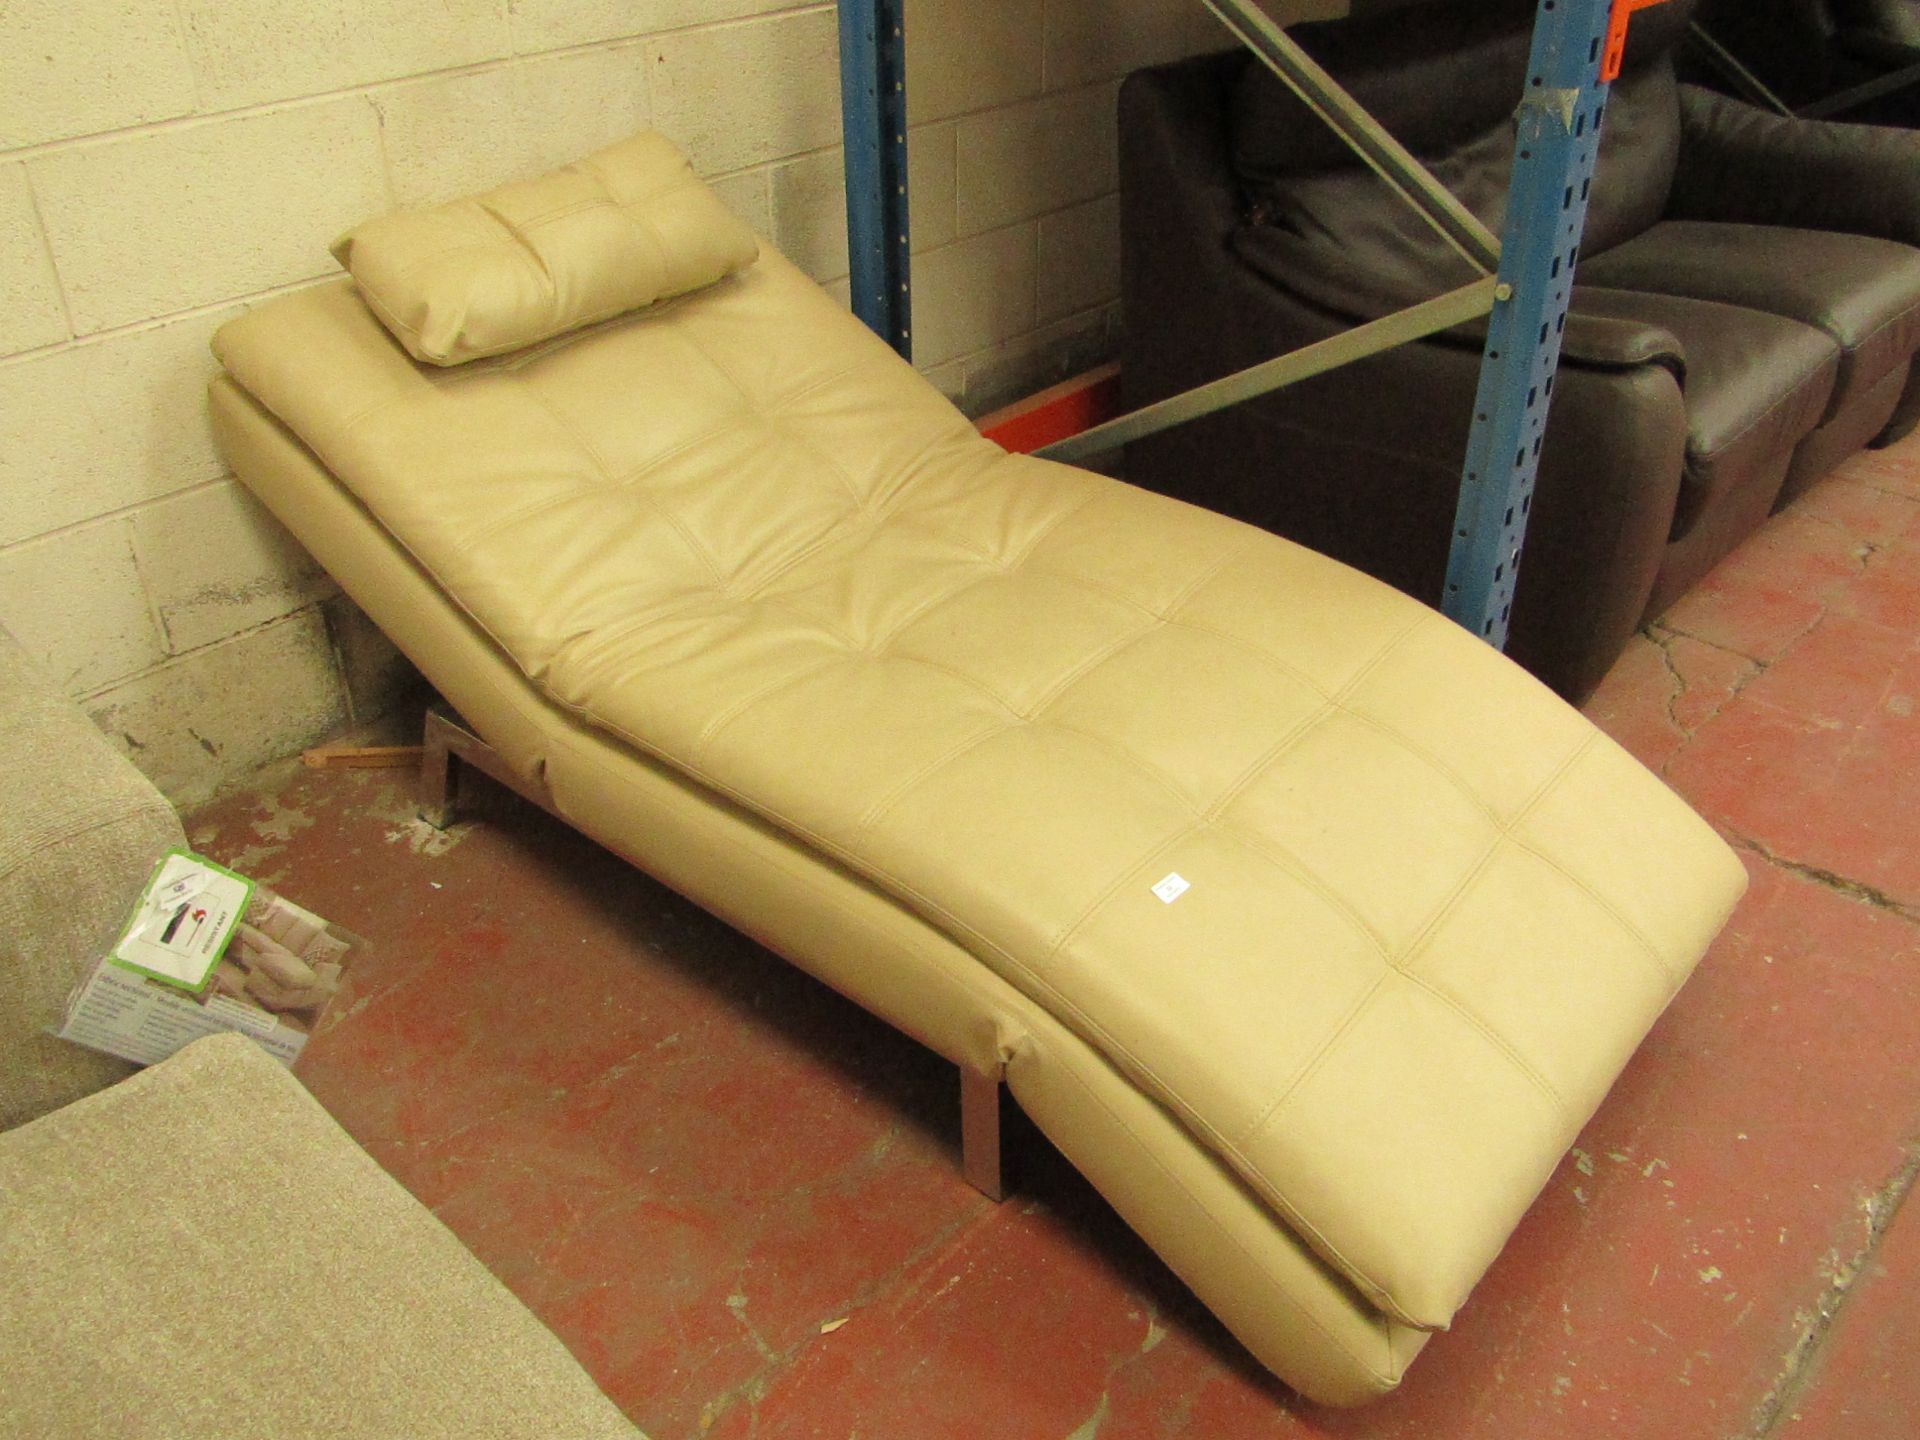 Costco Pulaski Leather chaise/bench/bed, chaise folds flat to be used as a bench or bed.mechanism